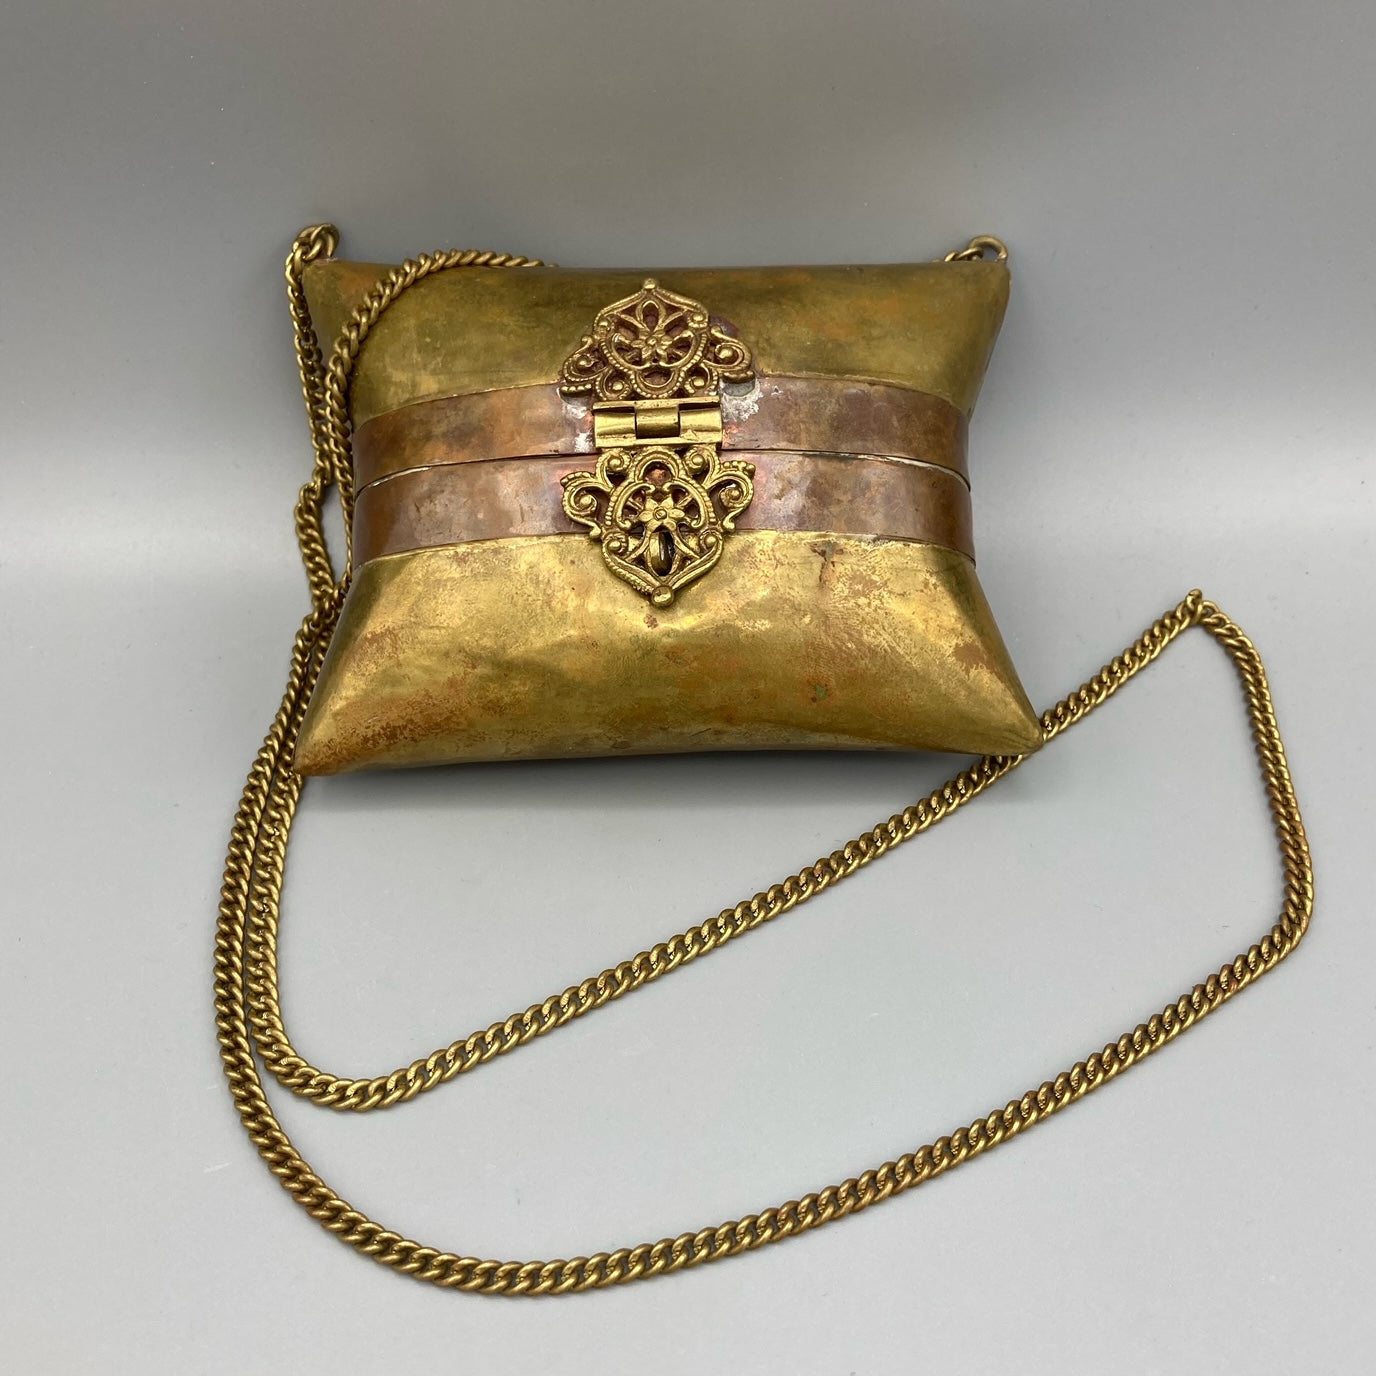 Brass & Copper Pillow Purse with Velvet Lining